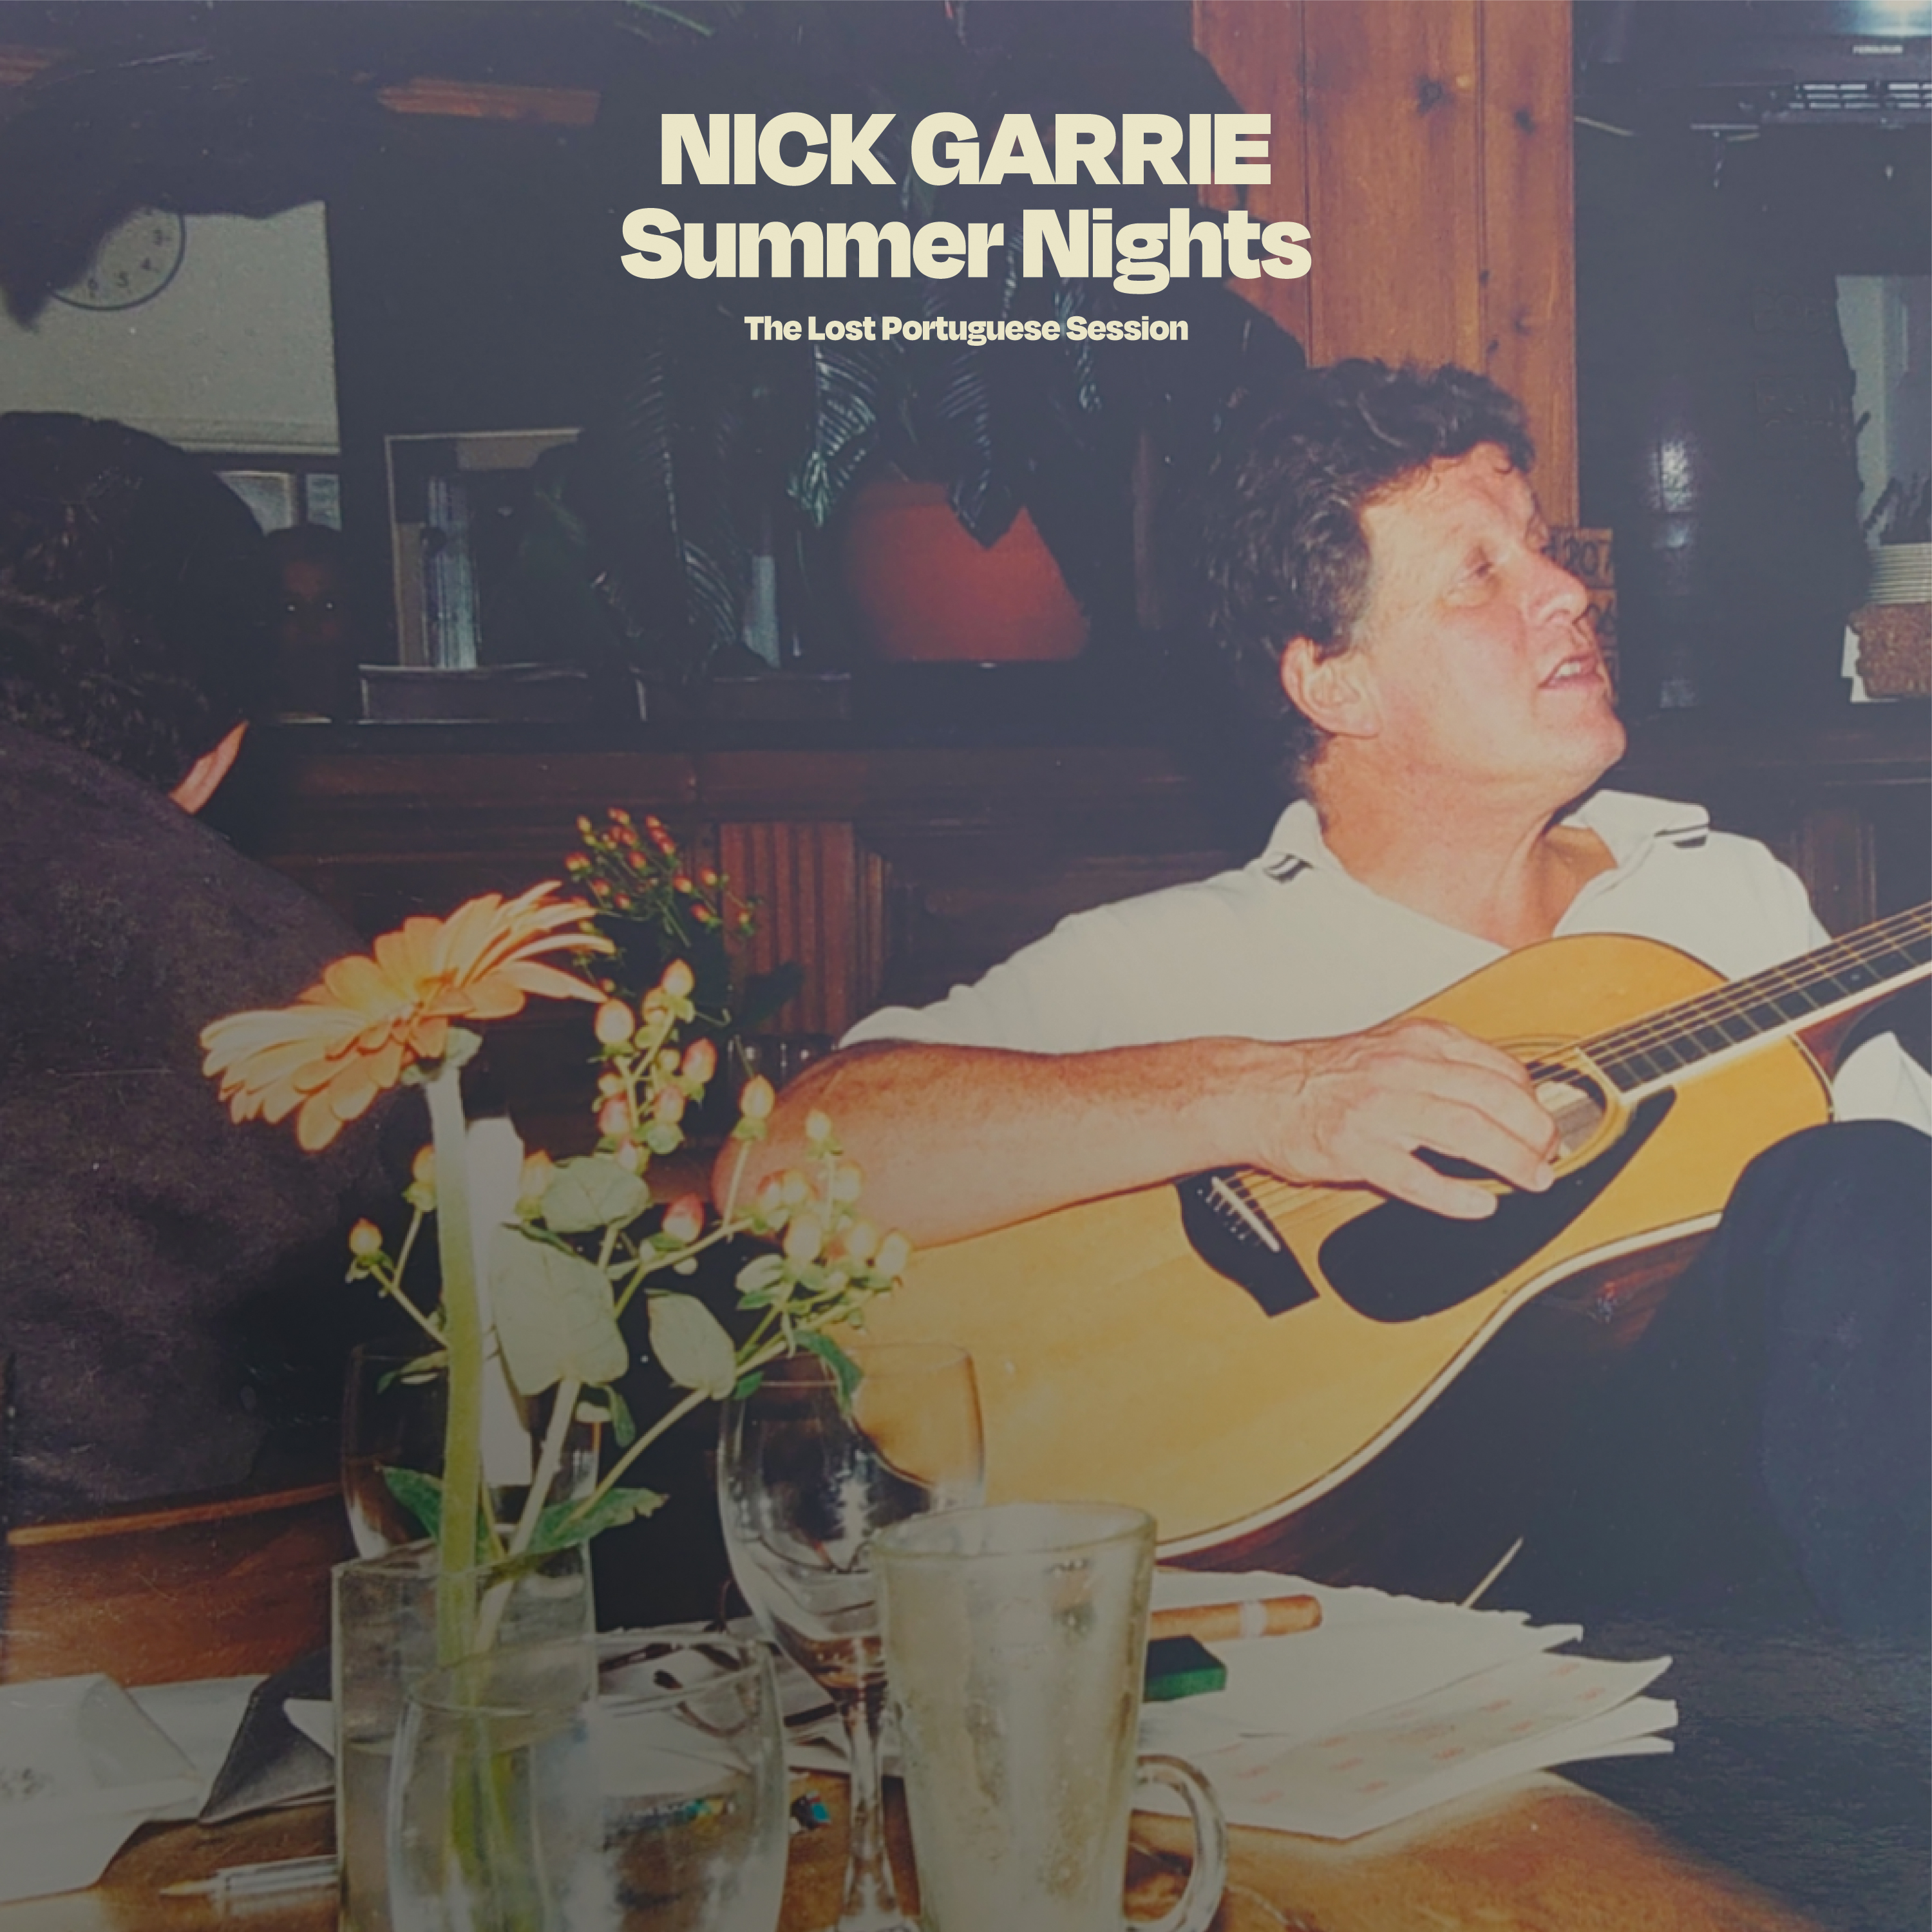 Nick Garrie – Summer Nights (The lost Portuguese session)